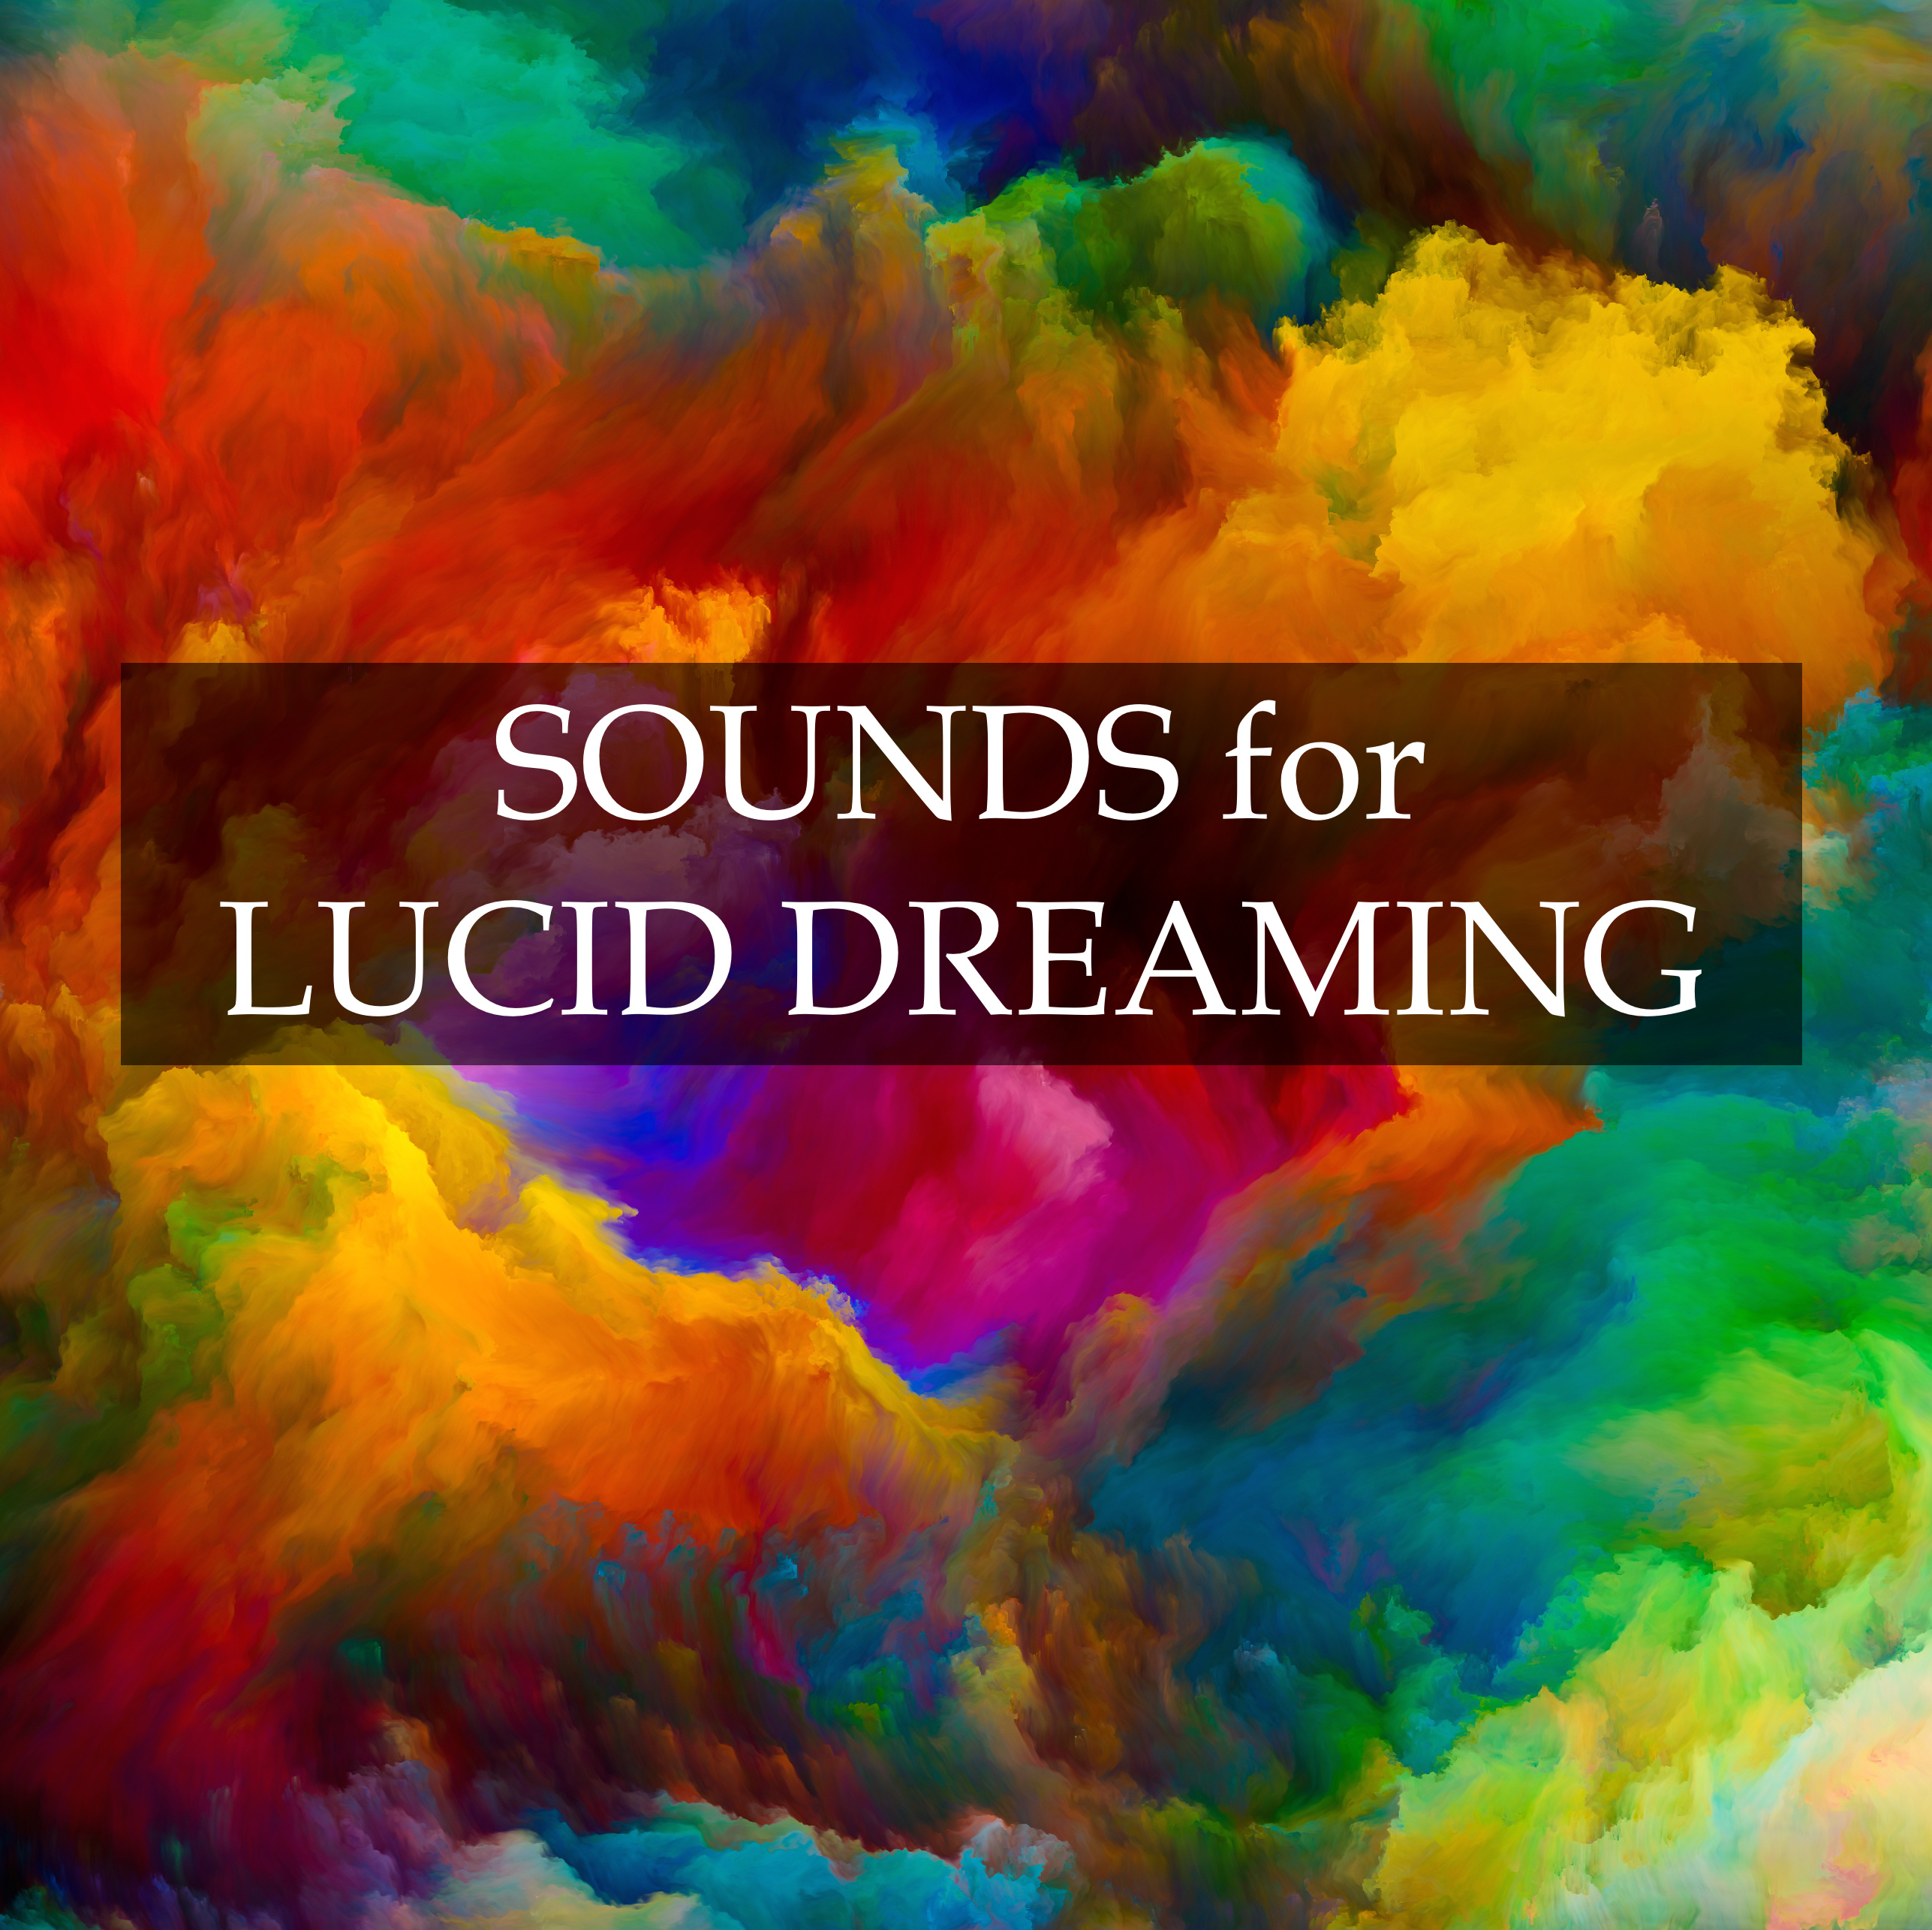 Sounds for Lucid Dreaming - Unlock the Hidden Power of Dream Control, Learn About Your Inner Self, Engage Deep Sleep and Relax Your Way to Better Mental Health